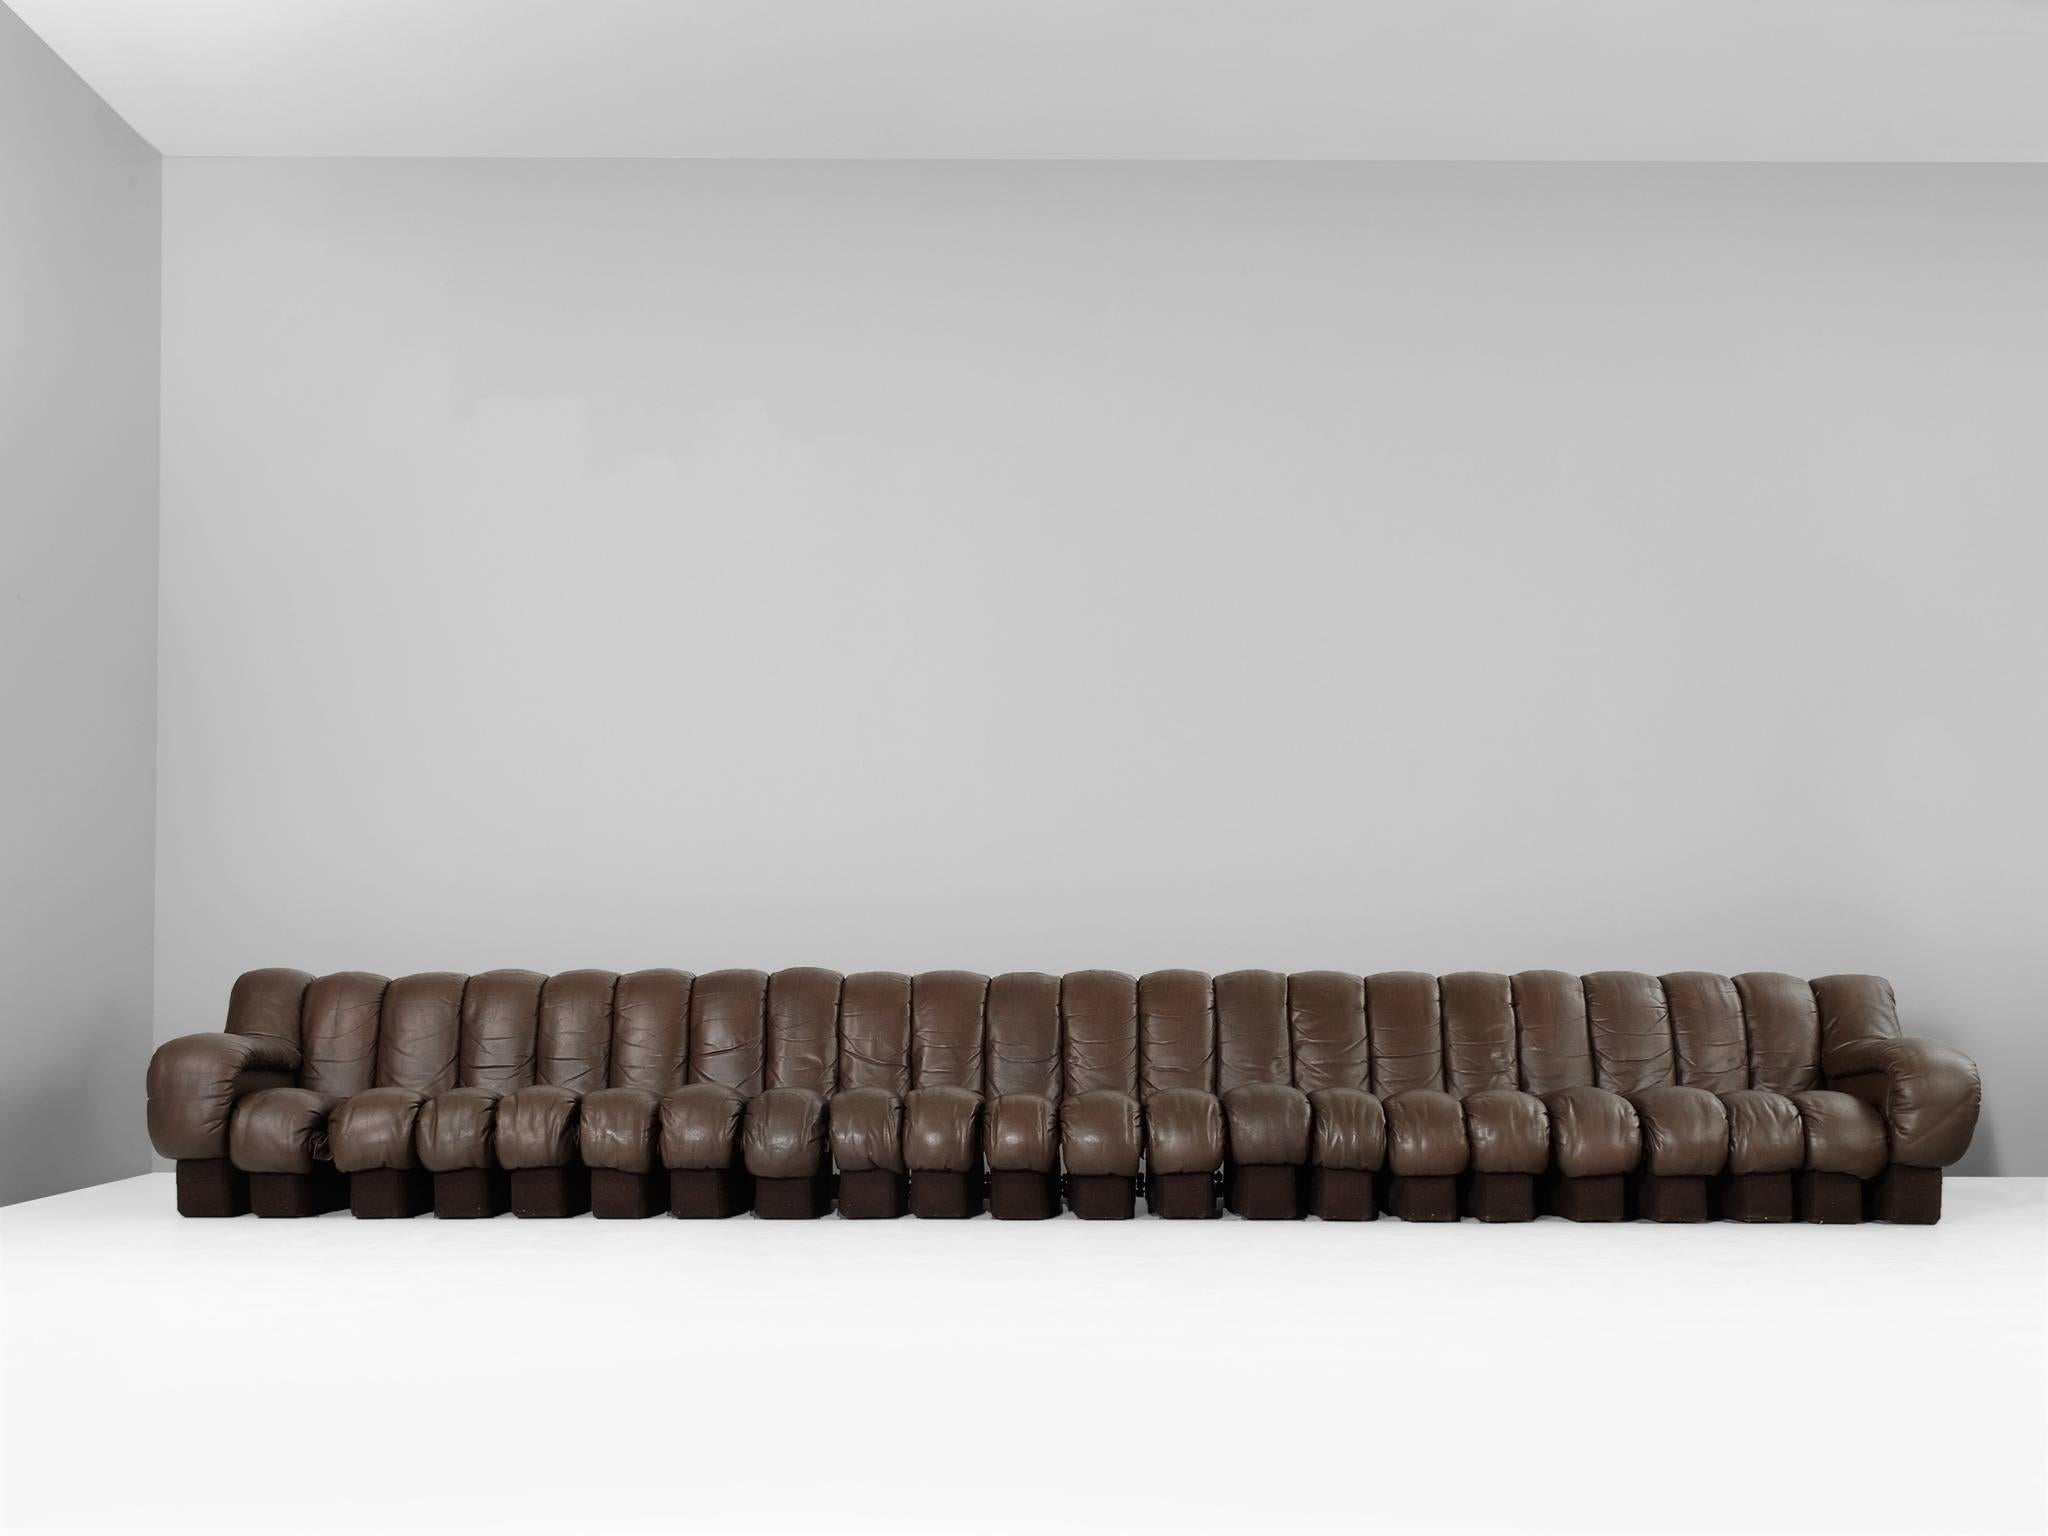 De Sede ‘Snake’ DS-600, in dark brown leather, Switzerland, 1972.

DeSede 'Non Stop' sectional sofa containing 22 pieces in original dark brown leather, of which 20 center pieces and 2 armrests. Any number of pieces can be zipped together ensuring